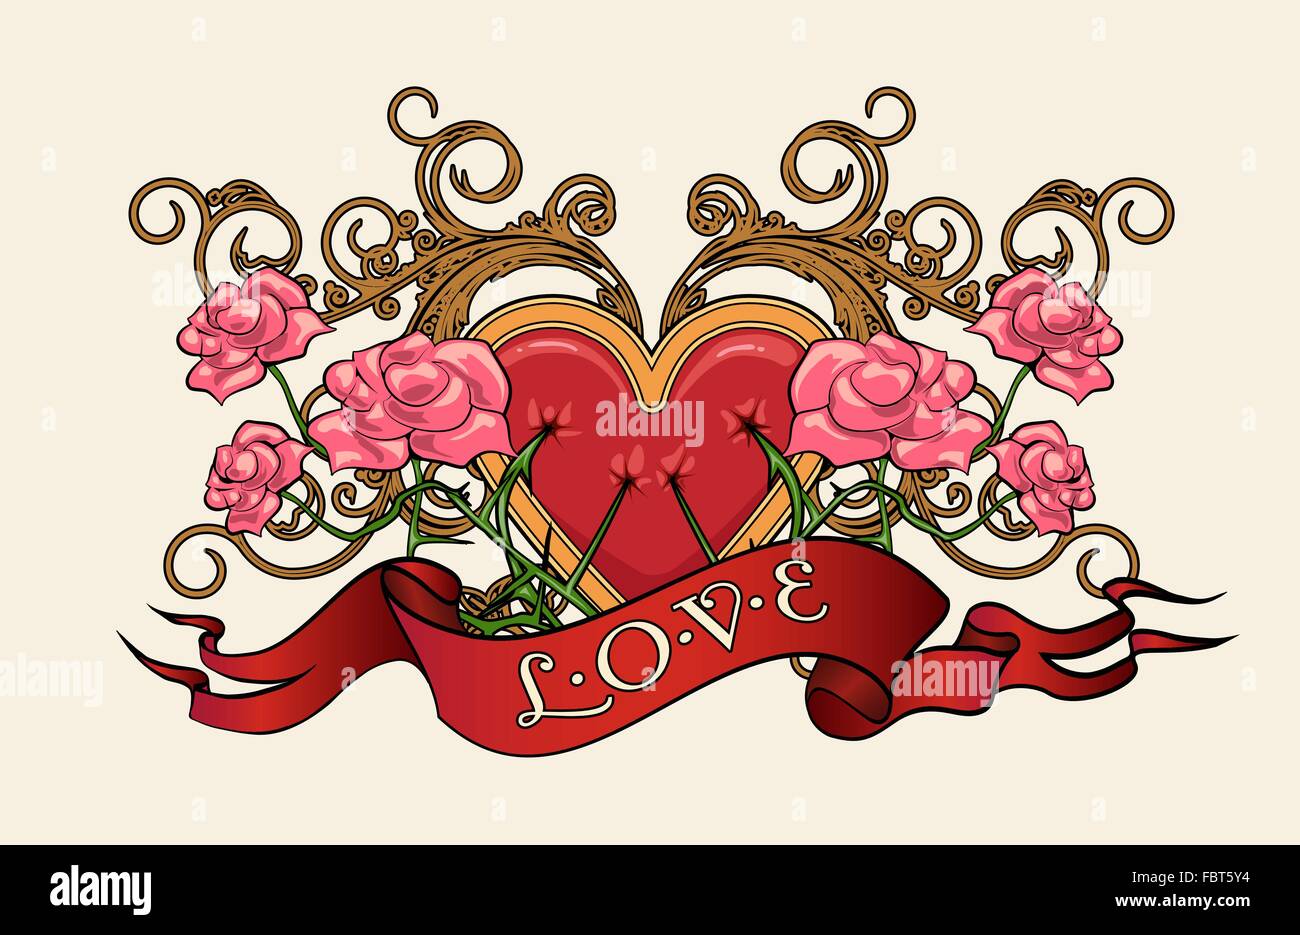 Heart in roses with thorns and wording Love. Illustration in tattoo style. Stock Vector